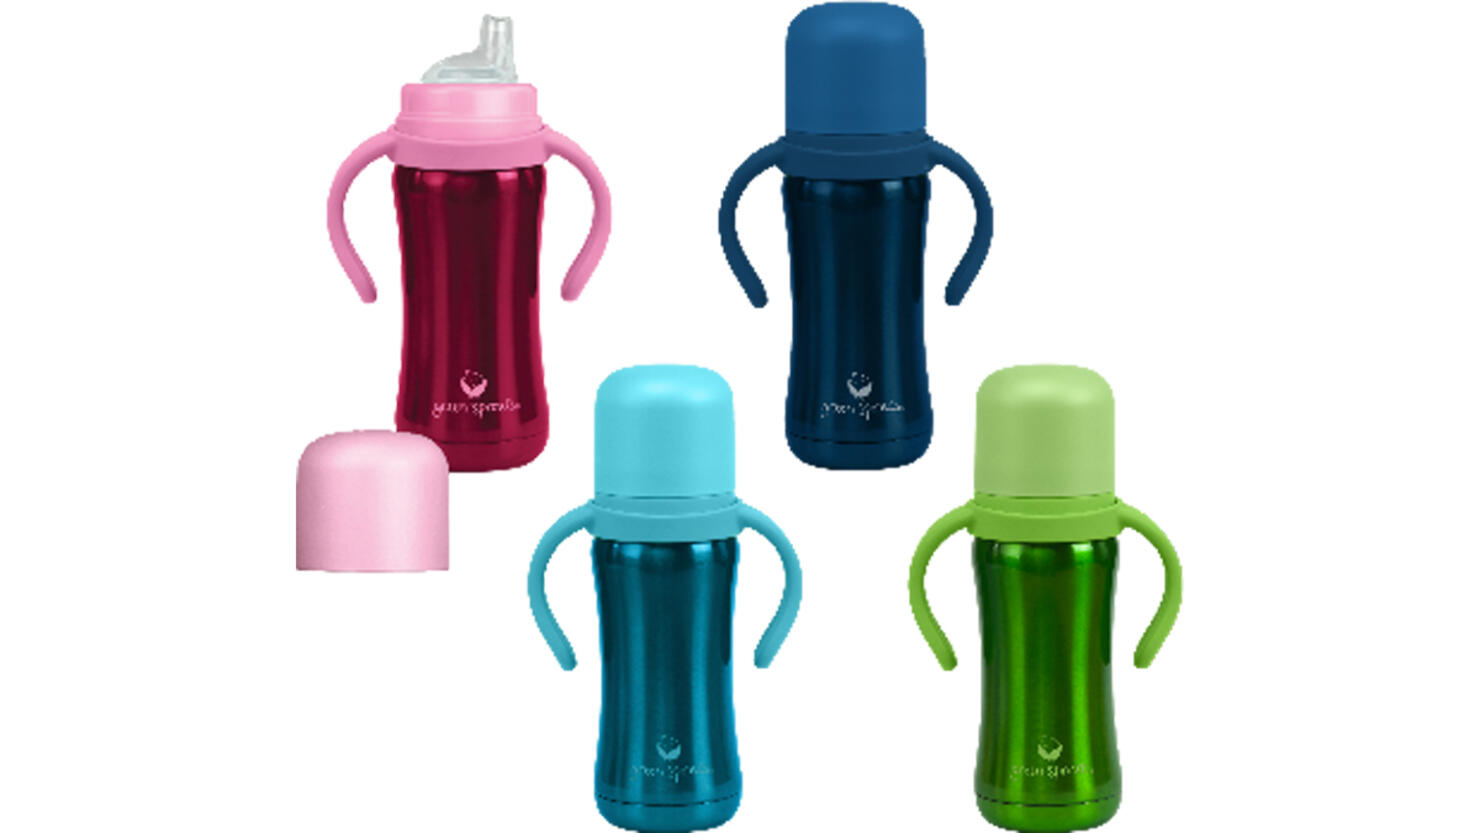 Recalled Green Sprouts sippy cups